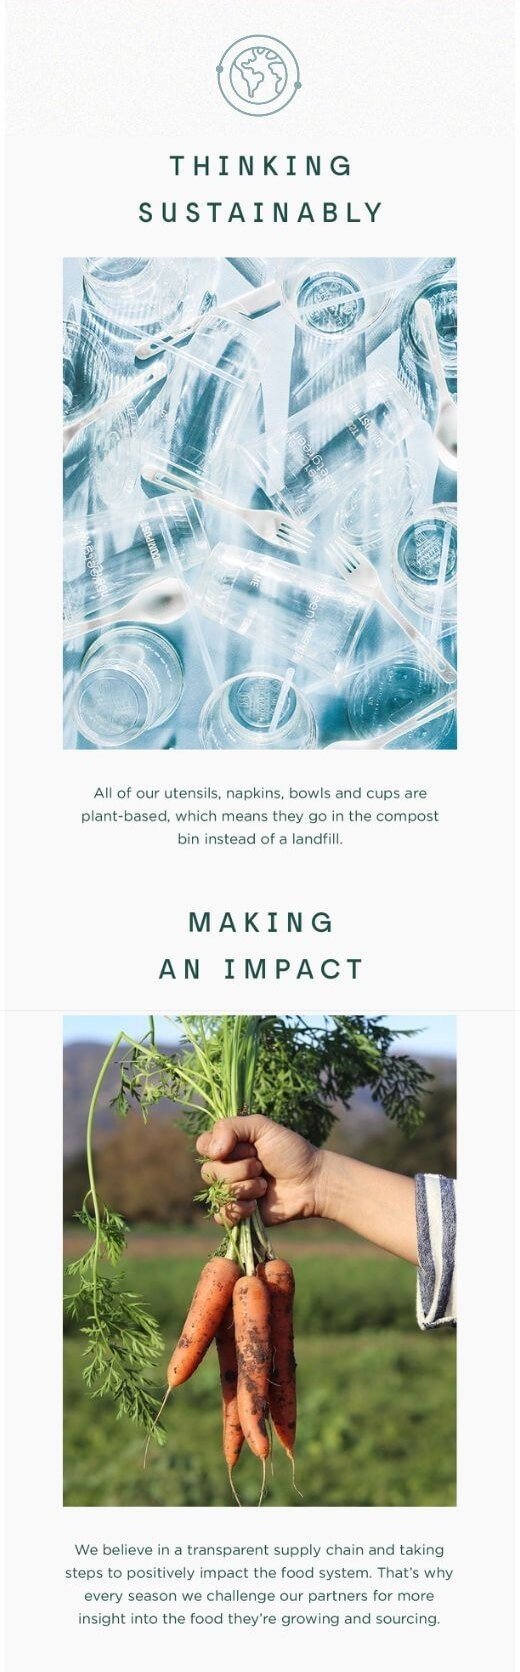 Email Examples for Earth Day